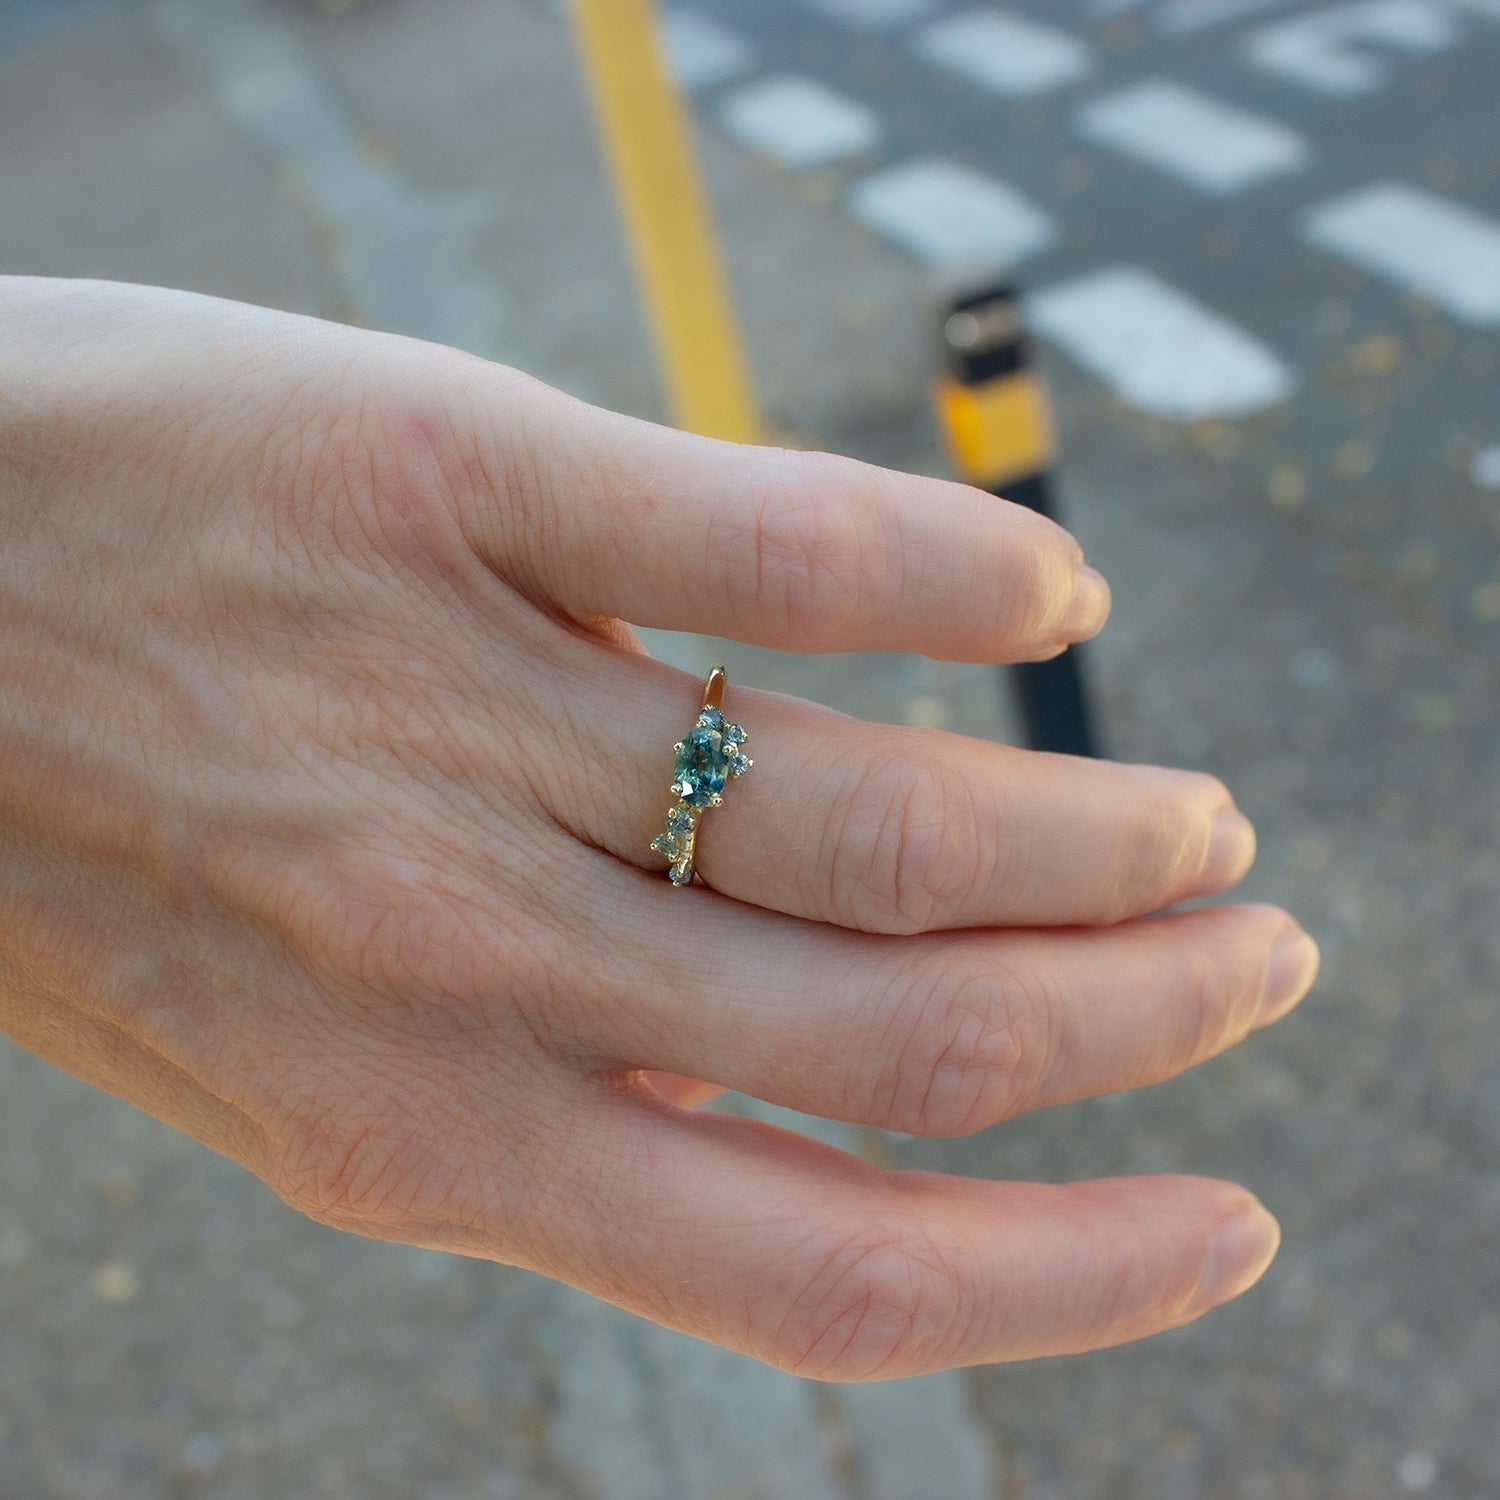 Beautiful alternative engagement ring featuring teal sapphbires scattered organically along the band.